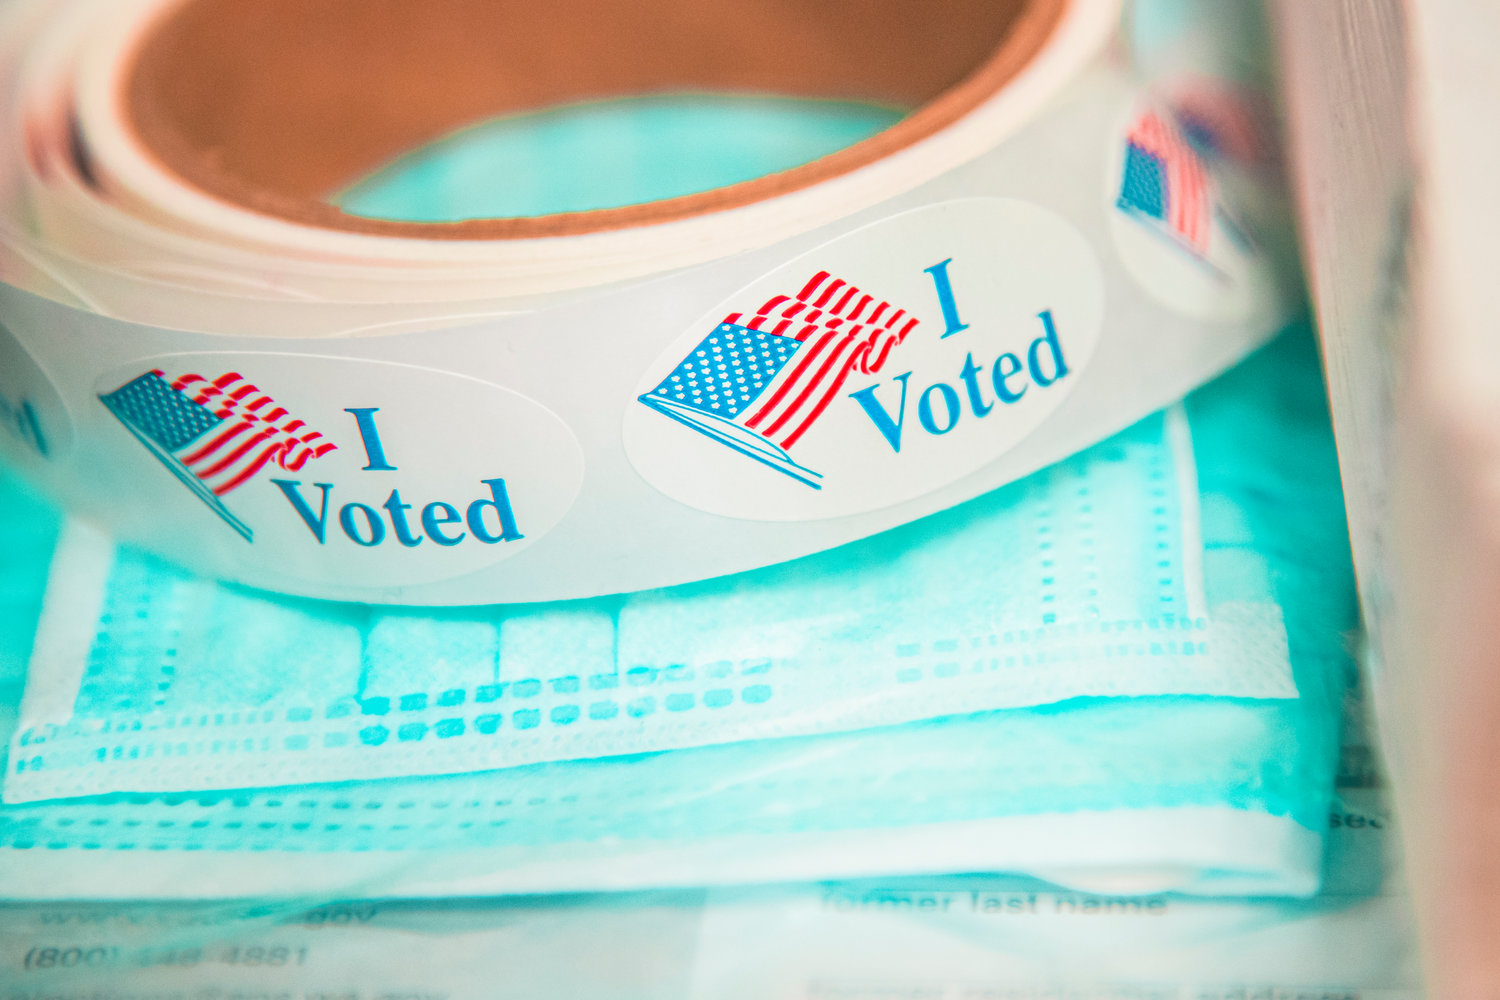 "I Voted" stickers are pictured in this file photo.